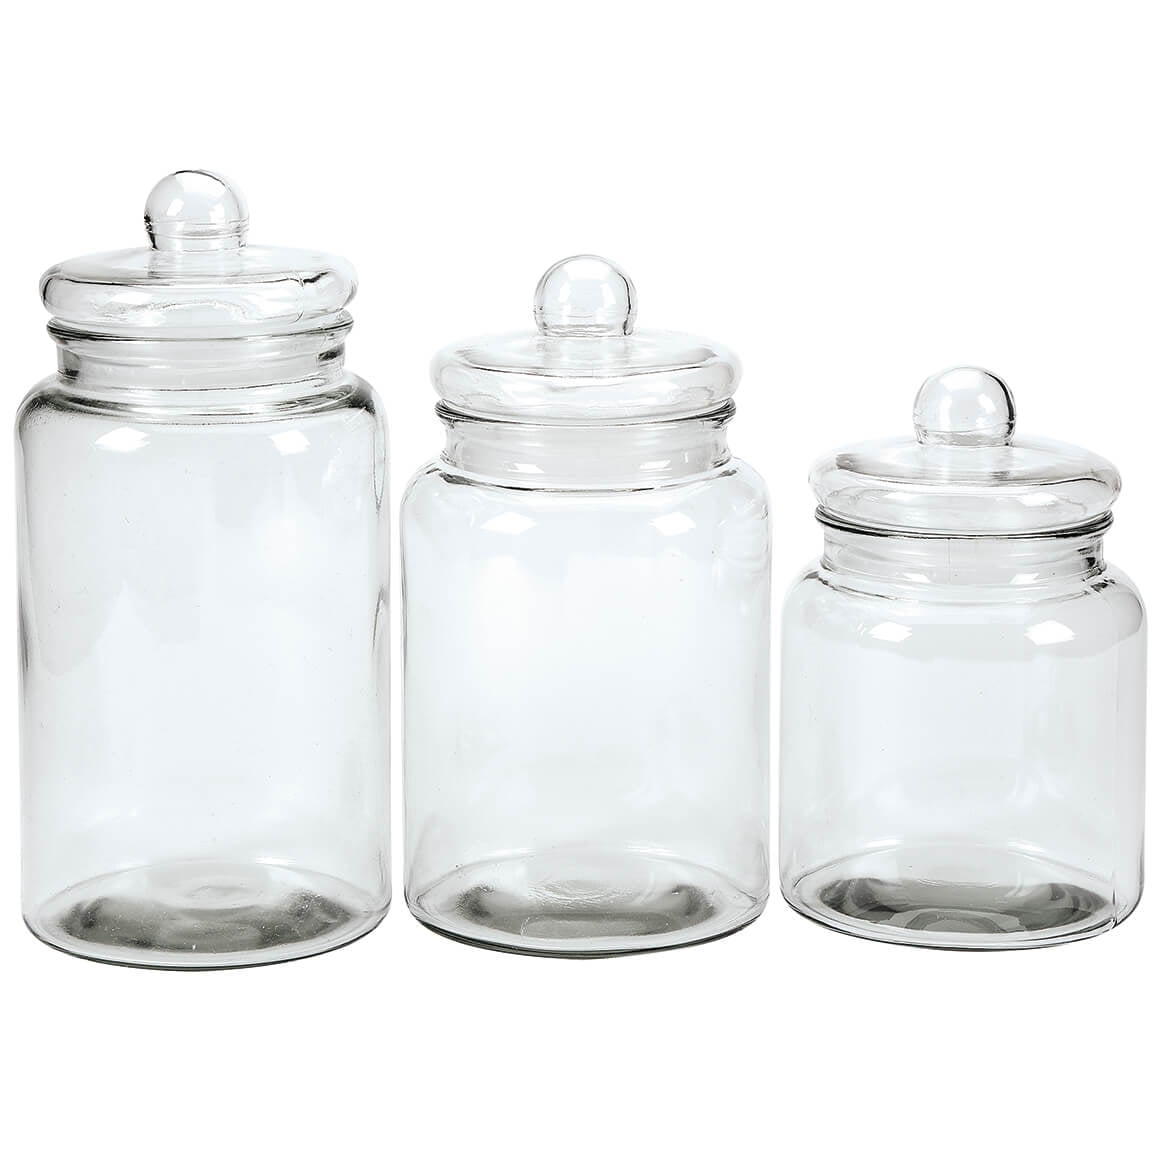 Glass Apothecary Jars with Lids, Decorative Display Canisters, Clear Storag...